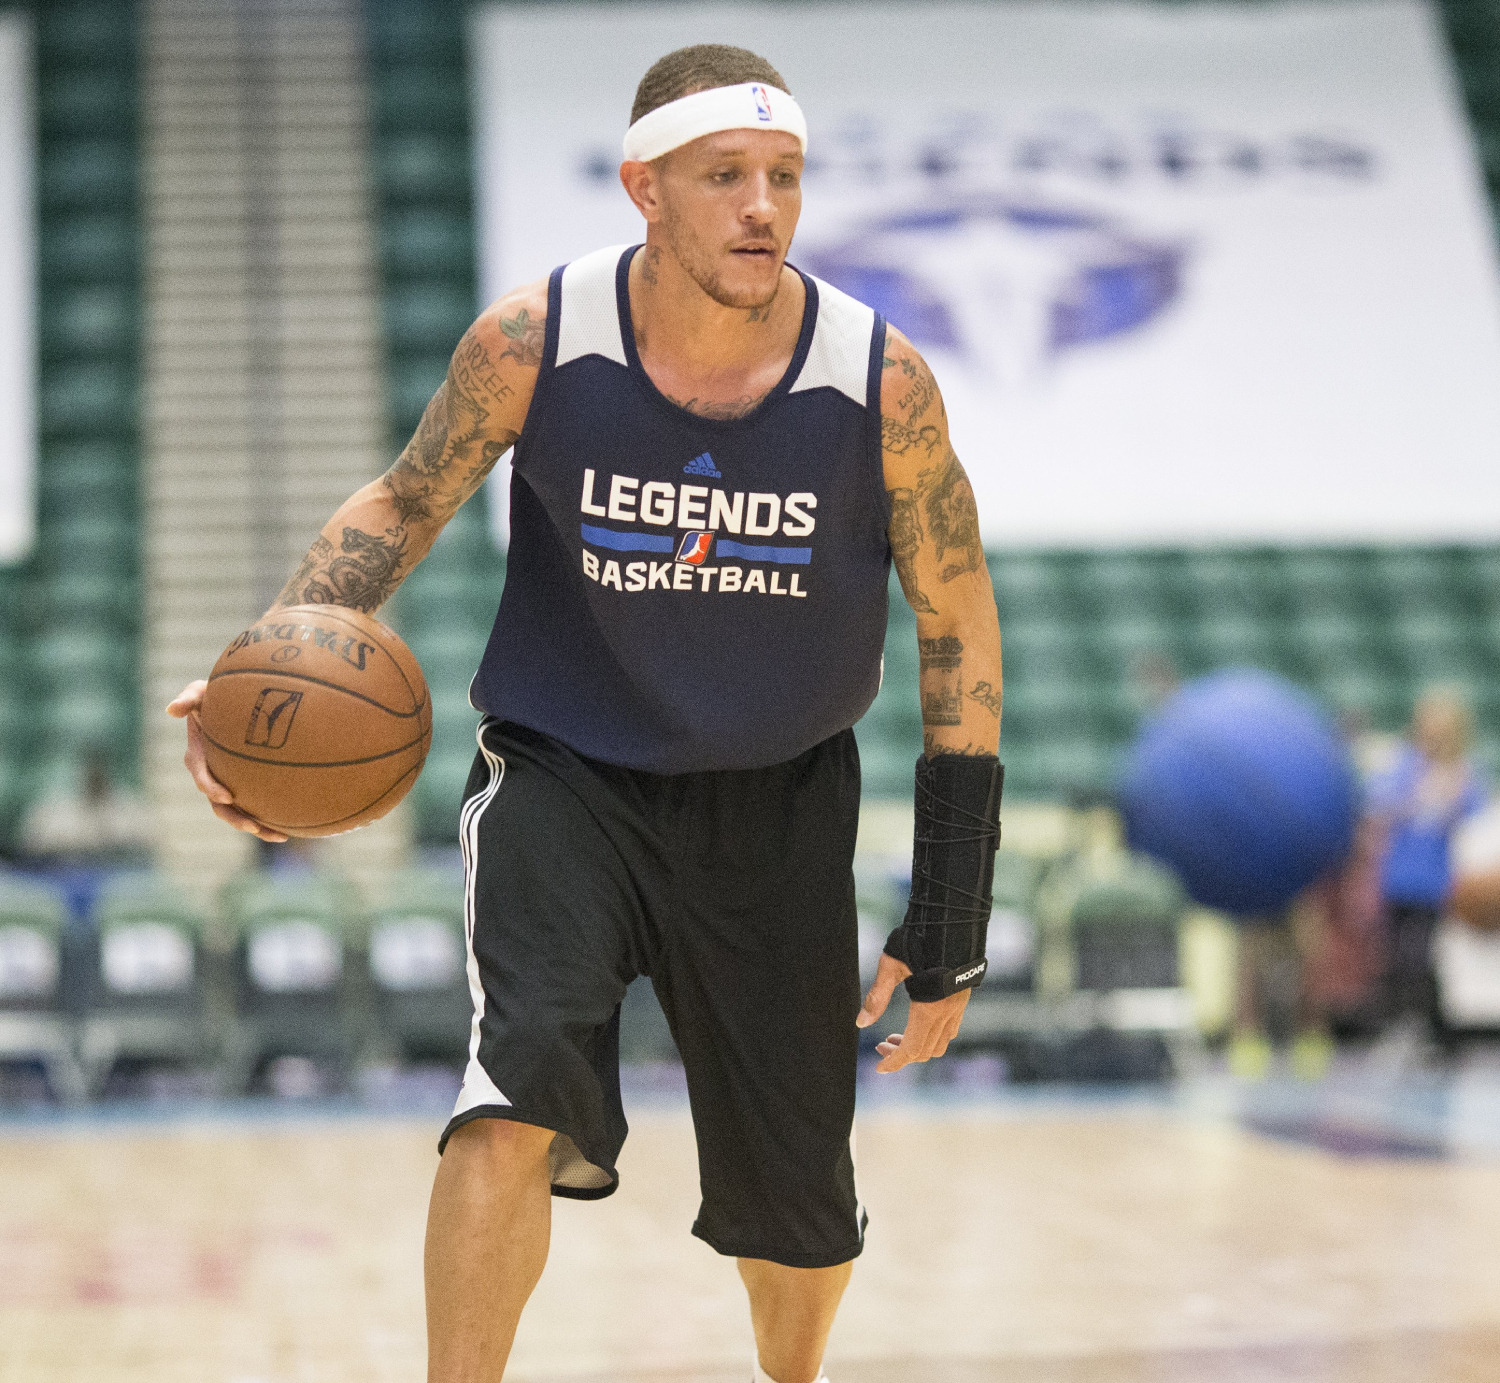 Darry Strawberry would love to reach out to Delonte West.